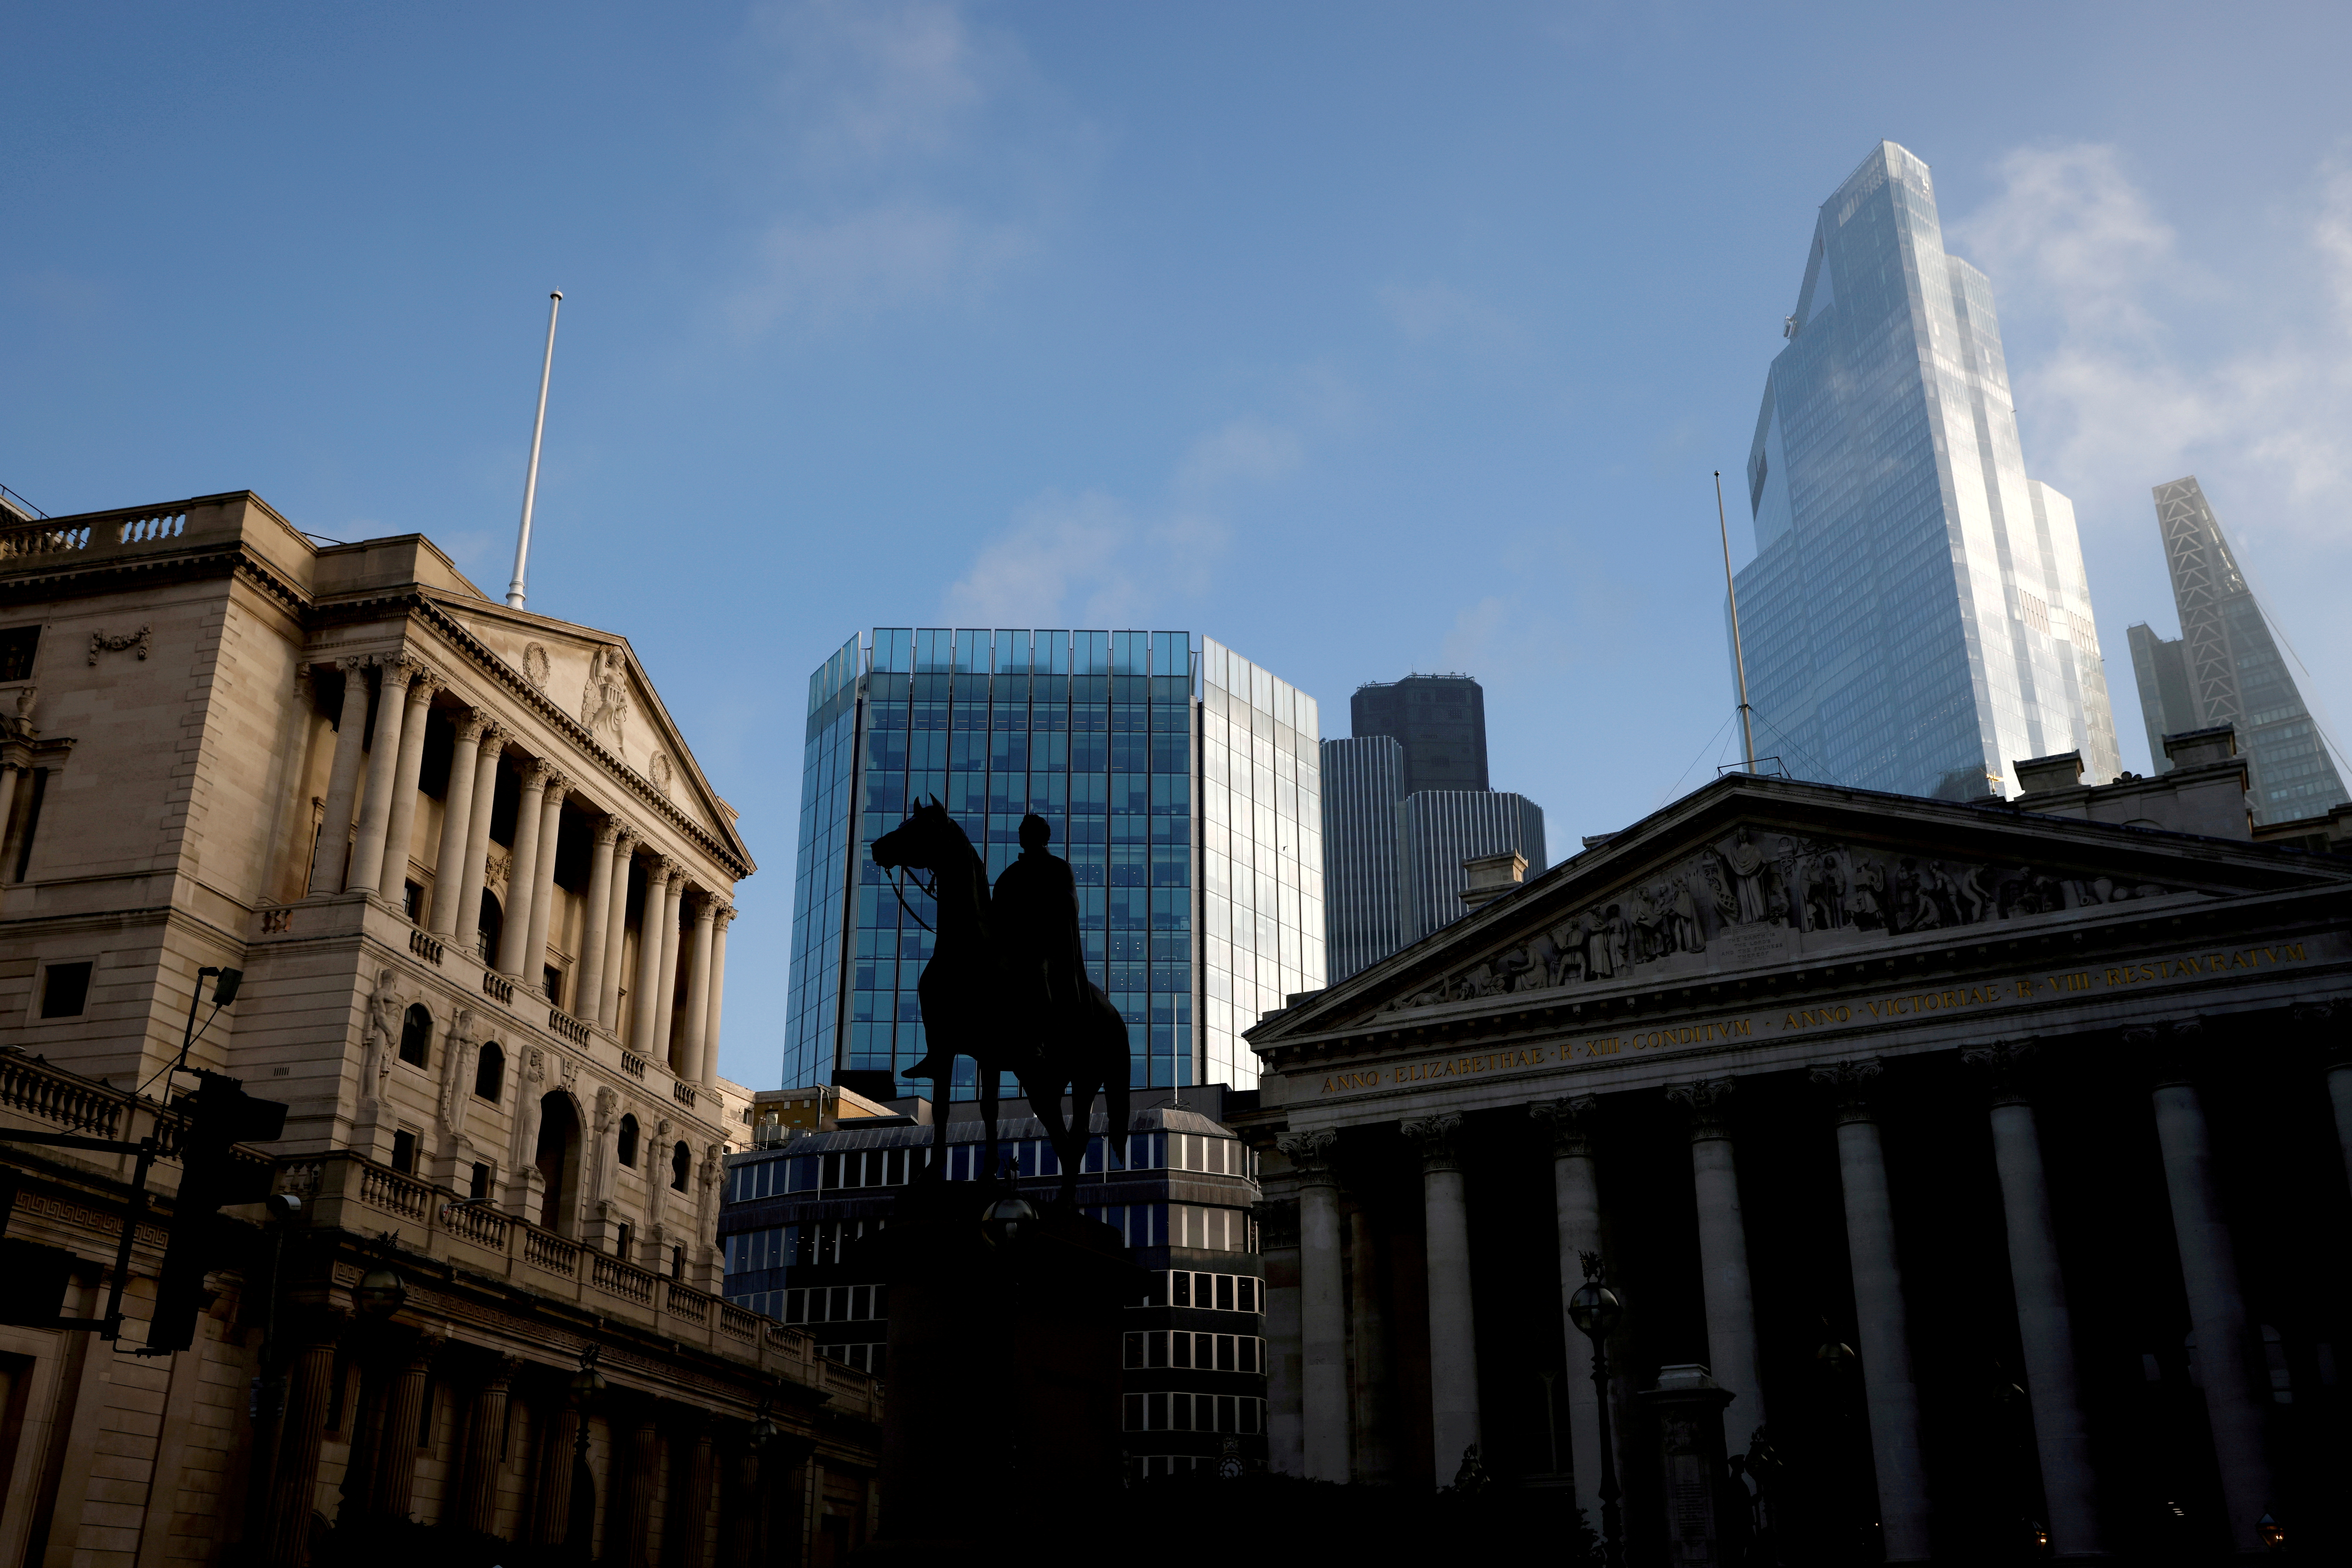 The Bank of England and the City of London financial district in London, Britain, November 5, 2020. REUTERS/John Sibley